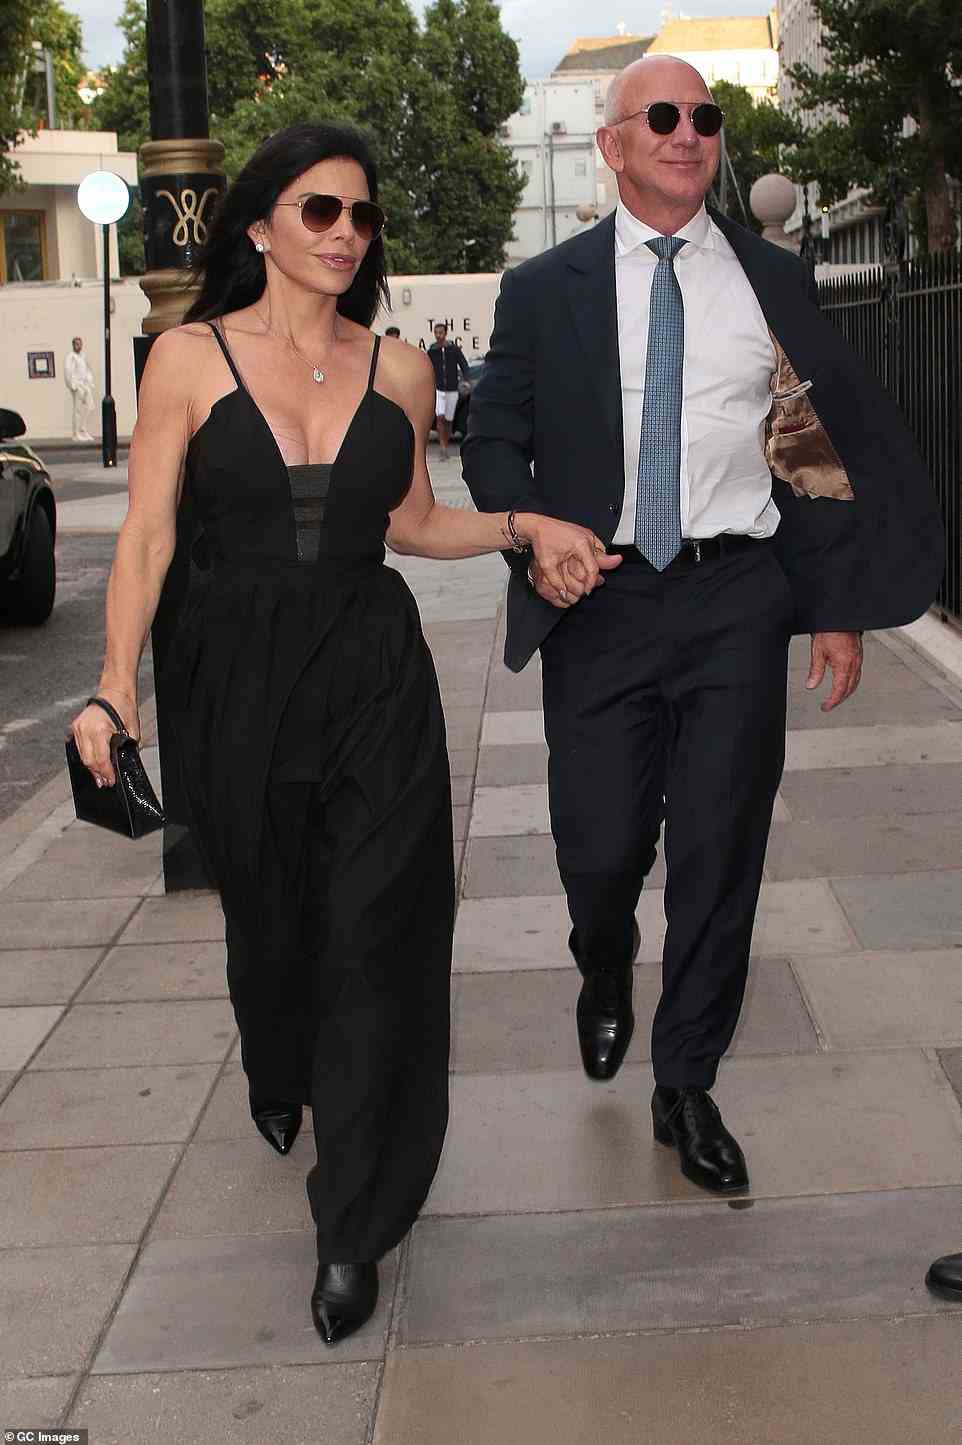 The couple was spotted heading to the celebrity hotspot The Twenty Two for dinner in Mayfair, London, on July 25, for which Sanchez wore a revealing black gown with a plunging neckline